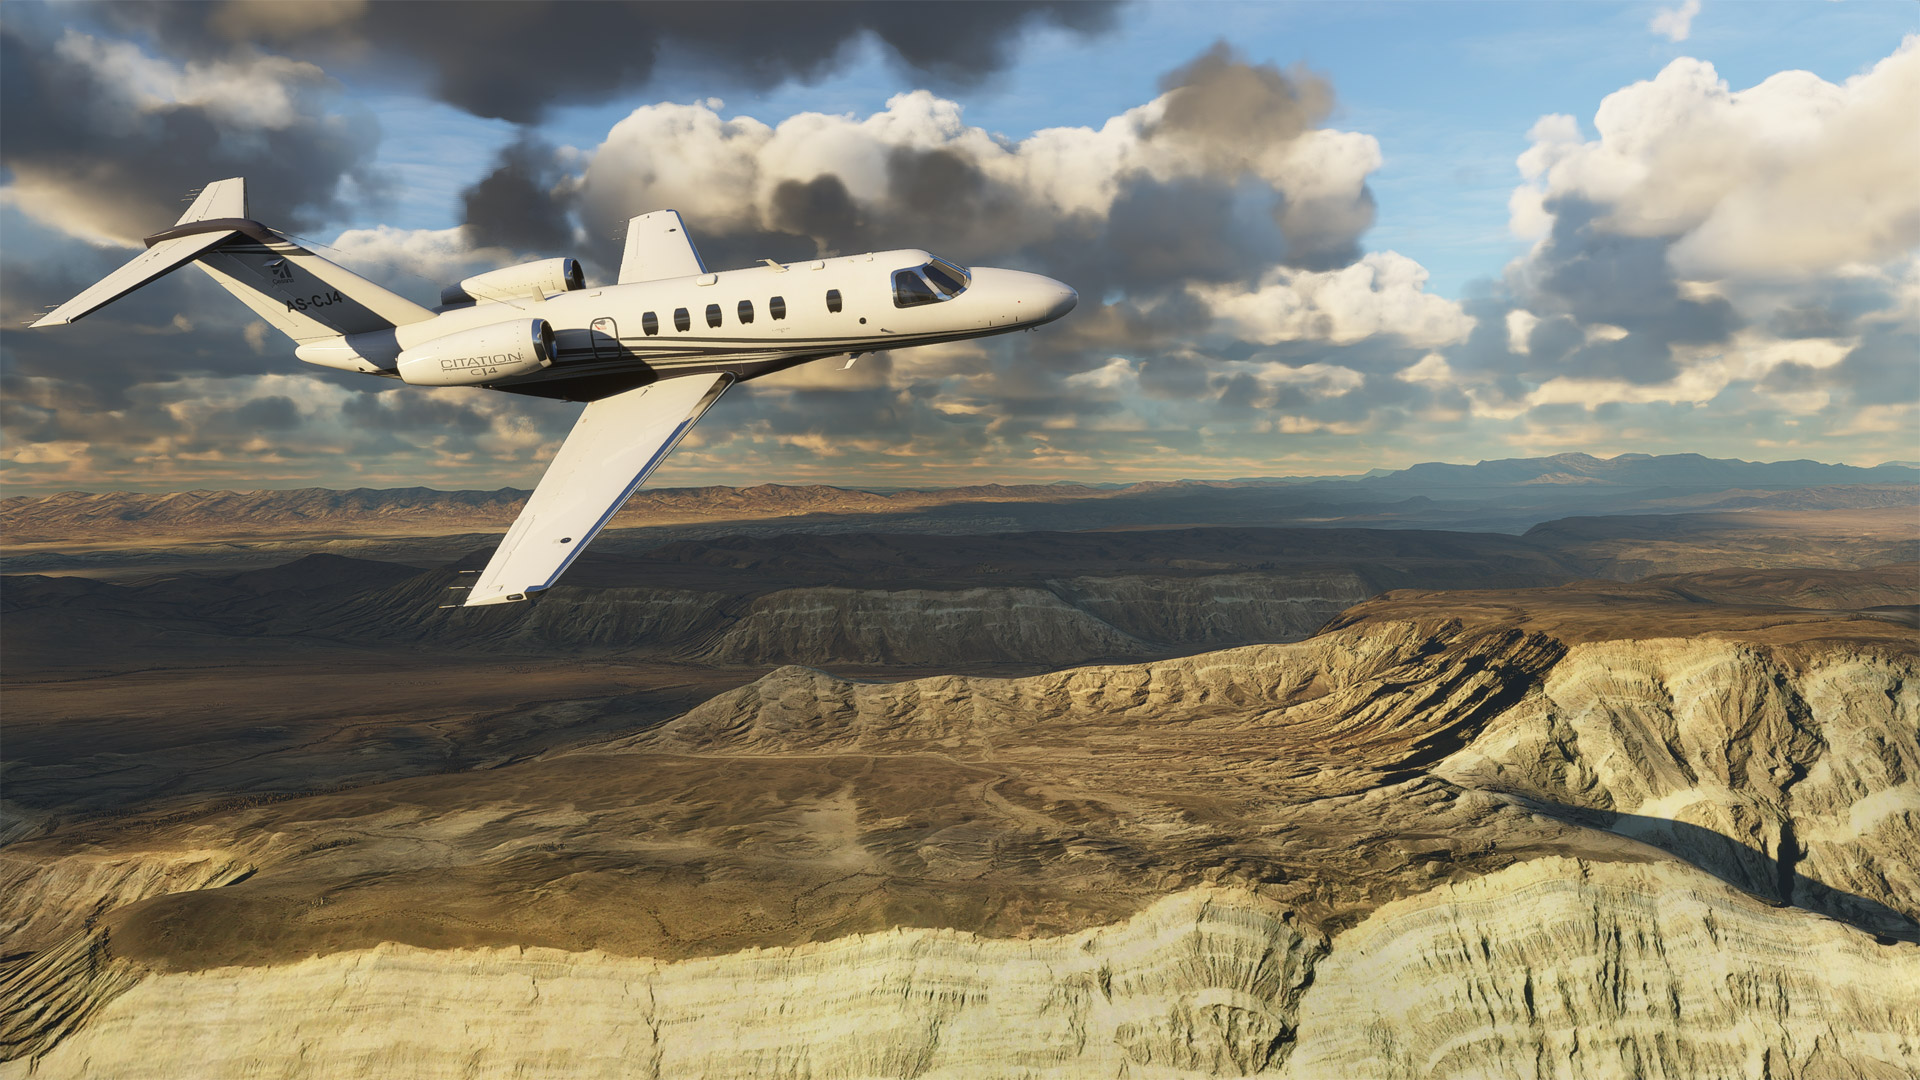 Best Microsoft Flight Simulator Settings For High FPS And Performance